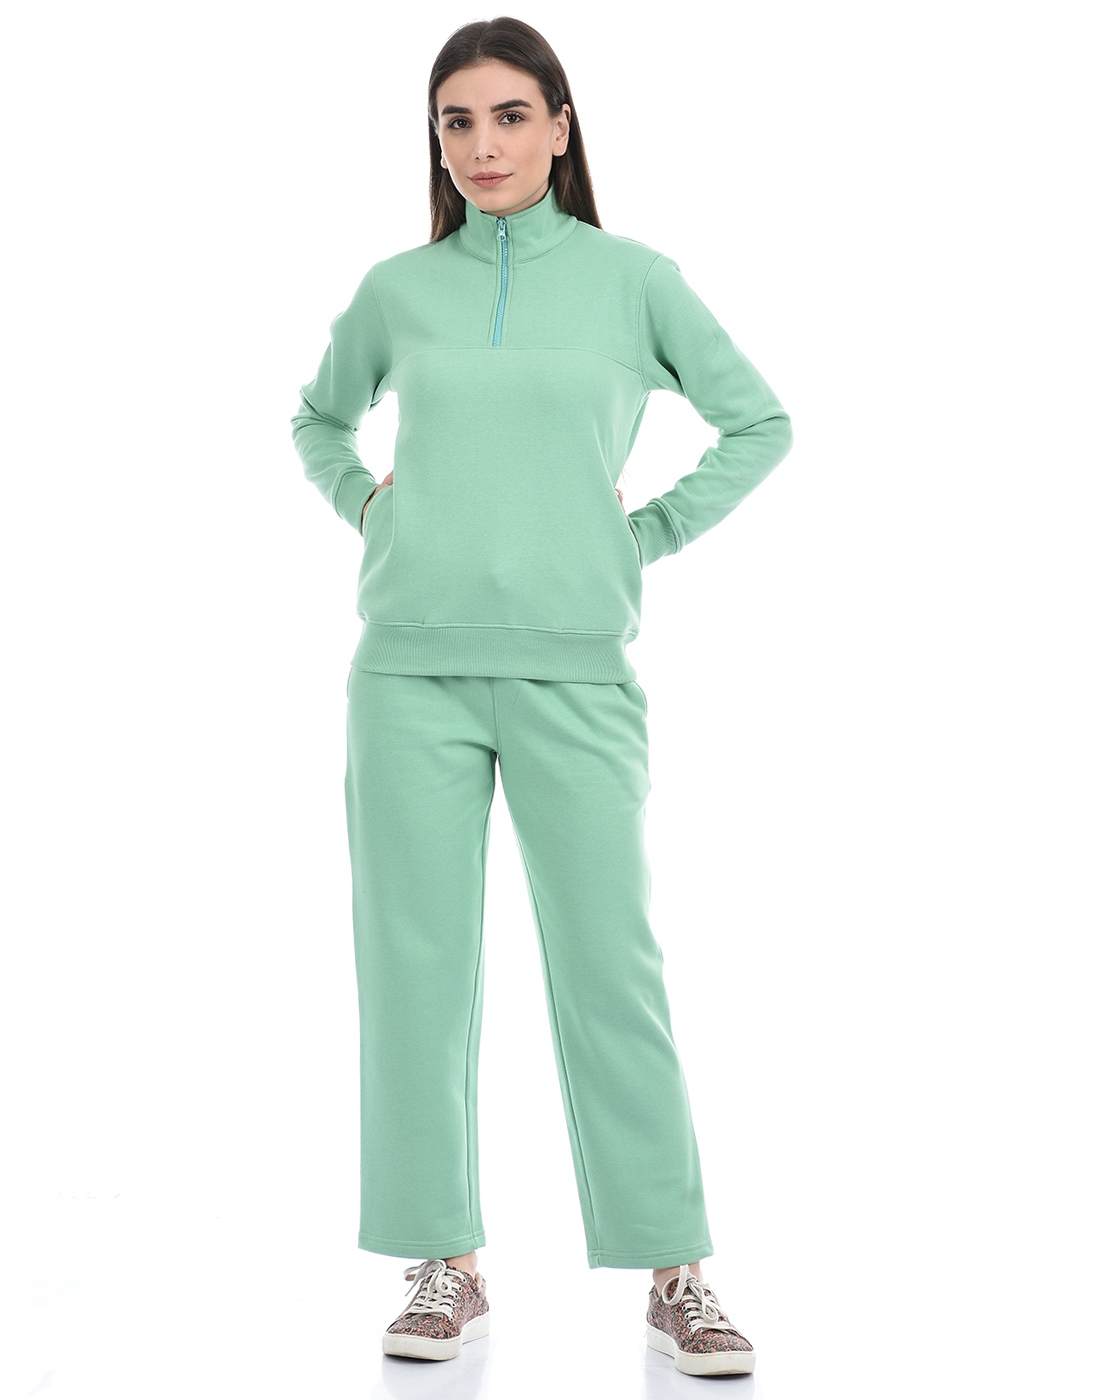 ONEWAY Women Solid Green Track Suit